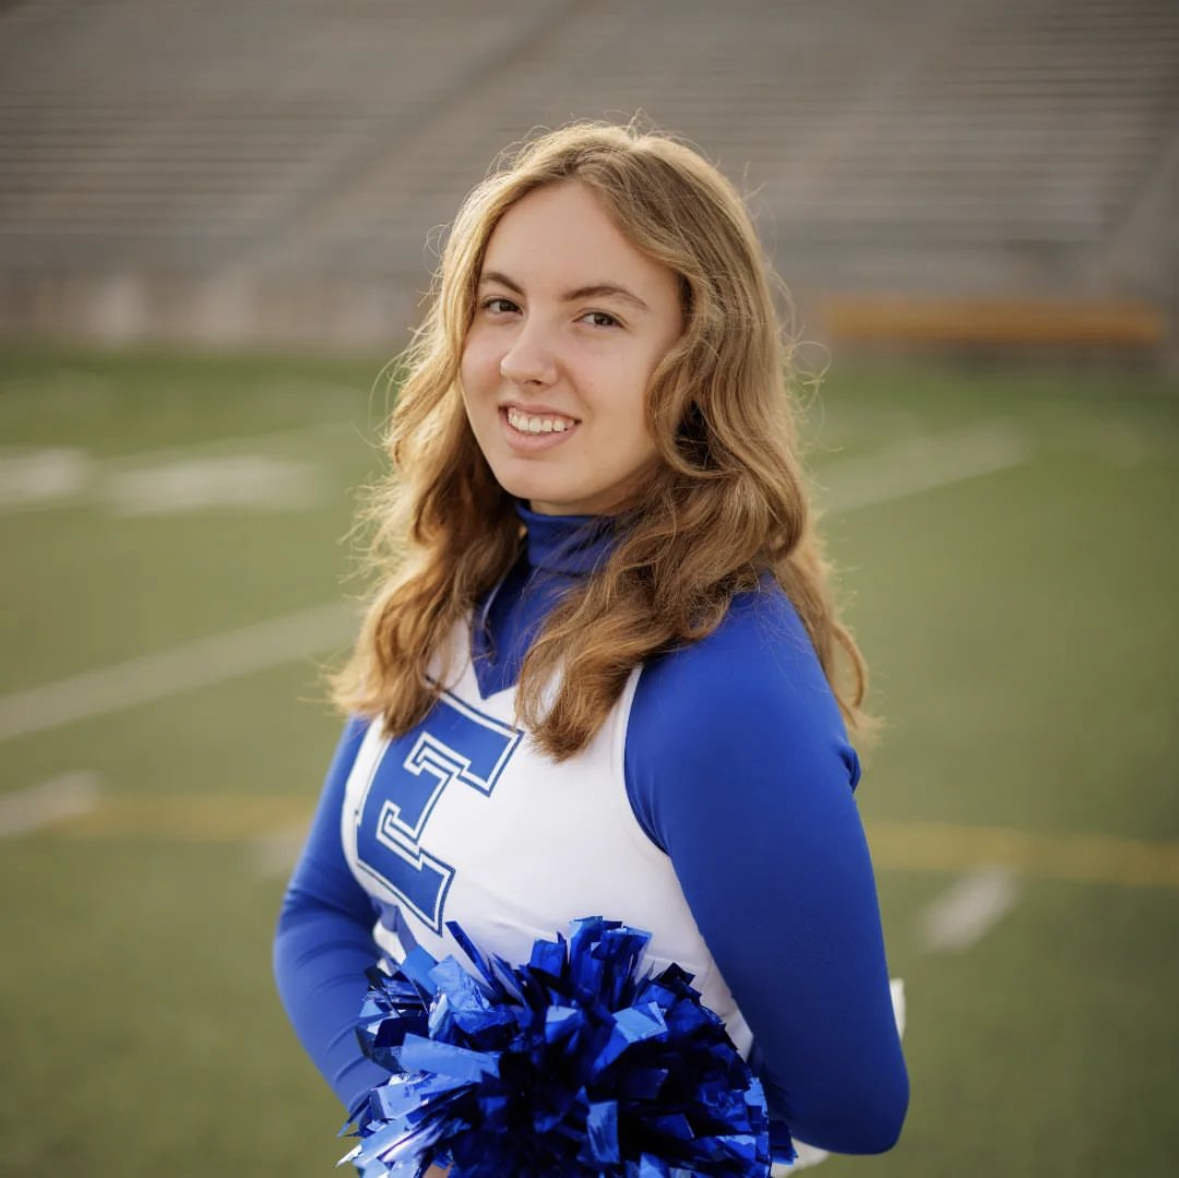 Hannah Borrell poses for the varsity cheerleaders photo-shoot in early September of 2023. Shes a senior on the cheer team whos writing her own fantasy novel.